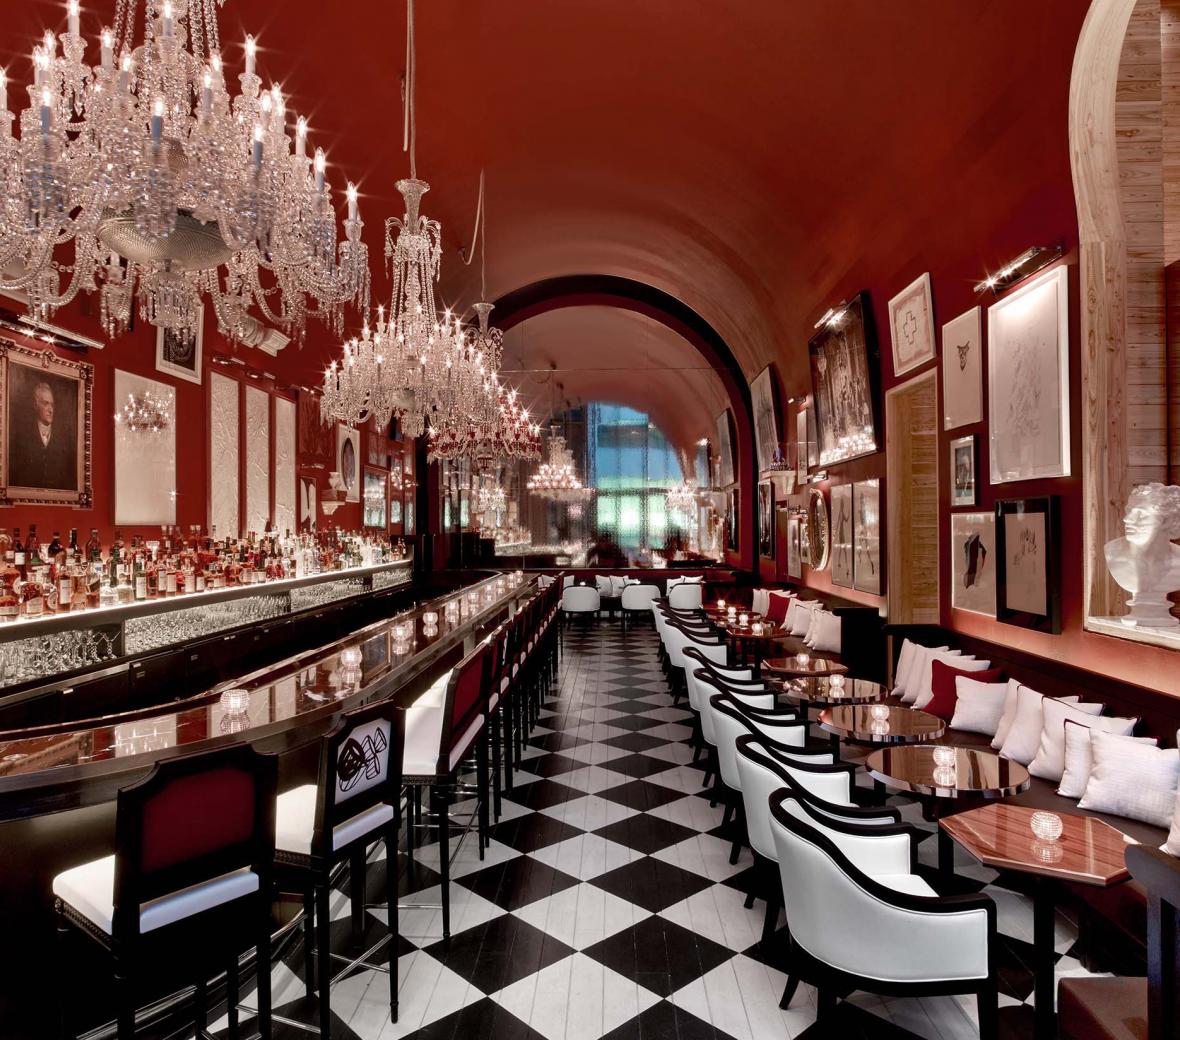 The interior of the Baccarat bar